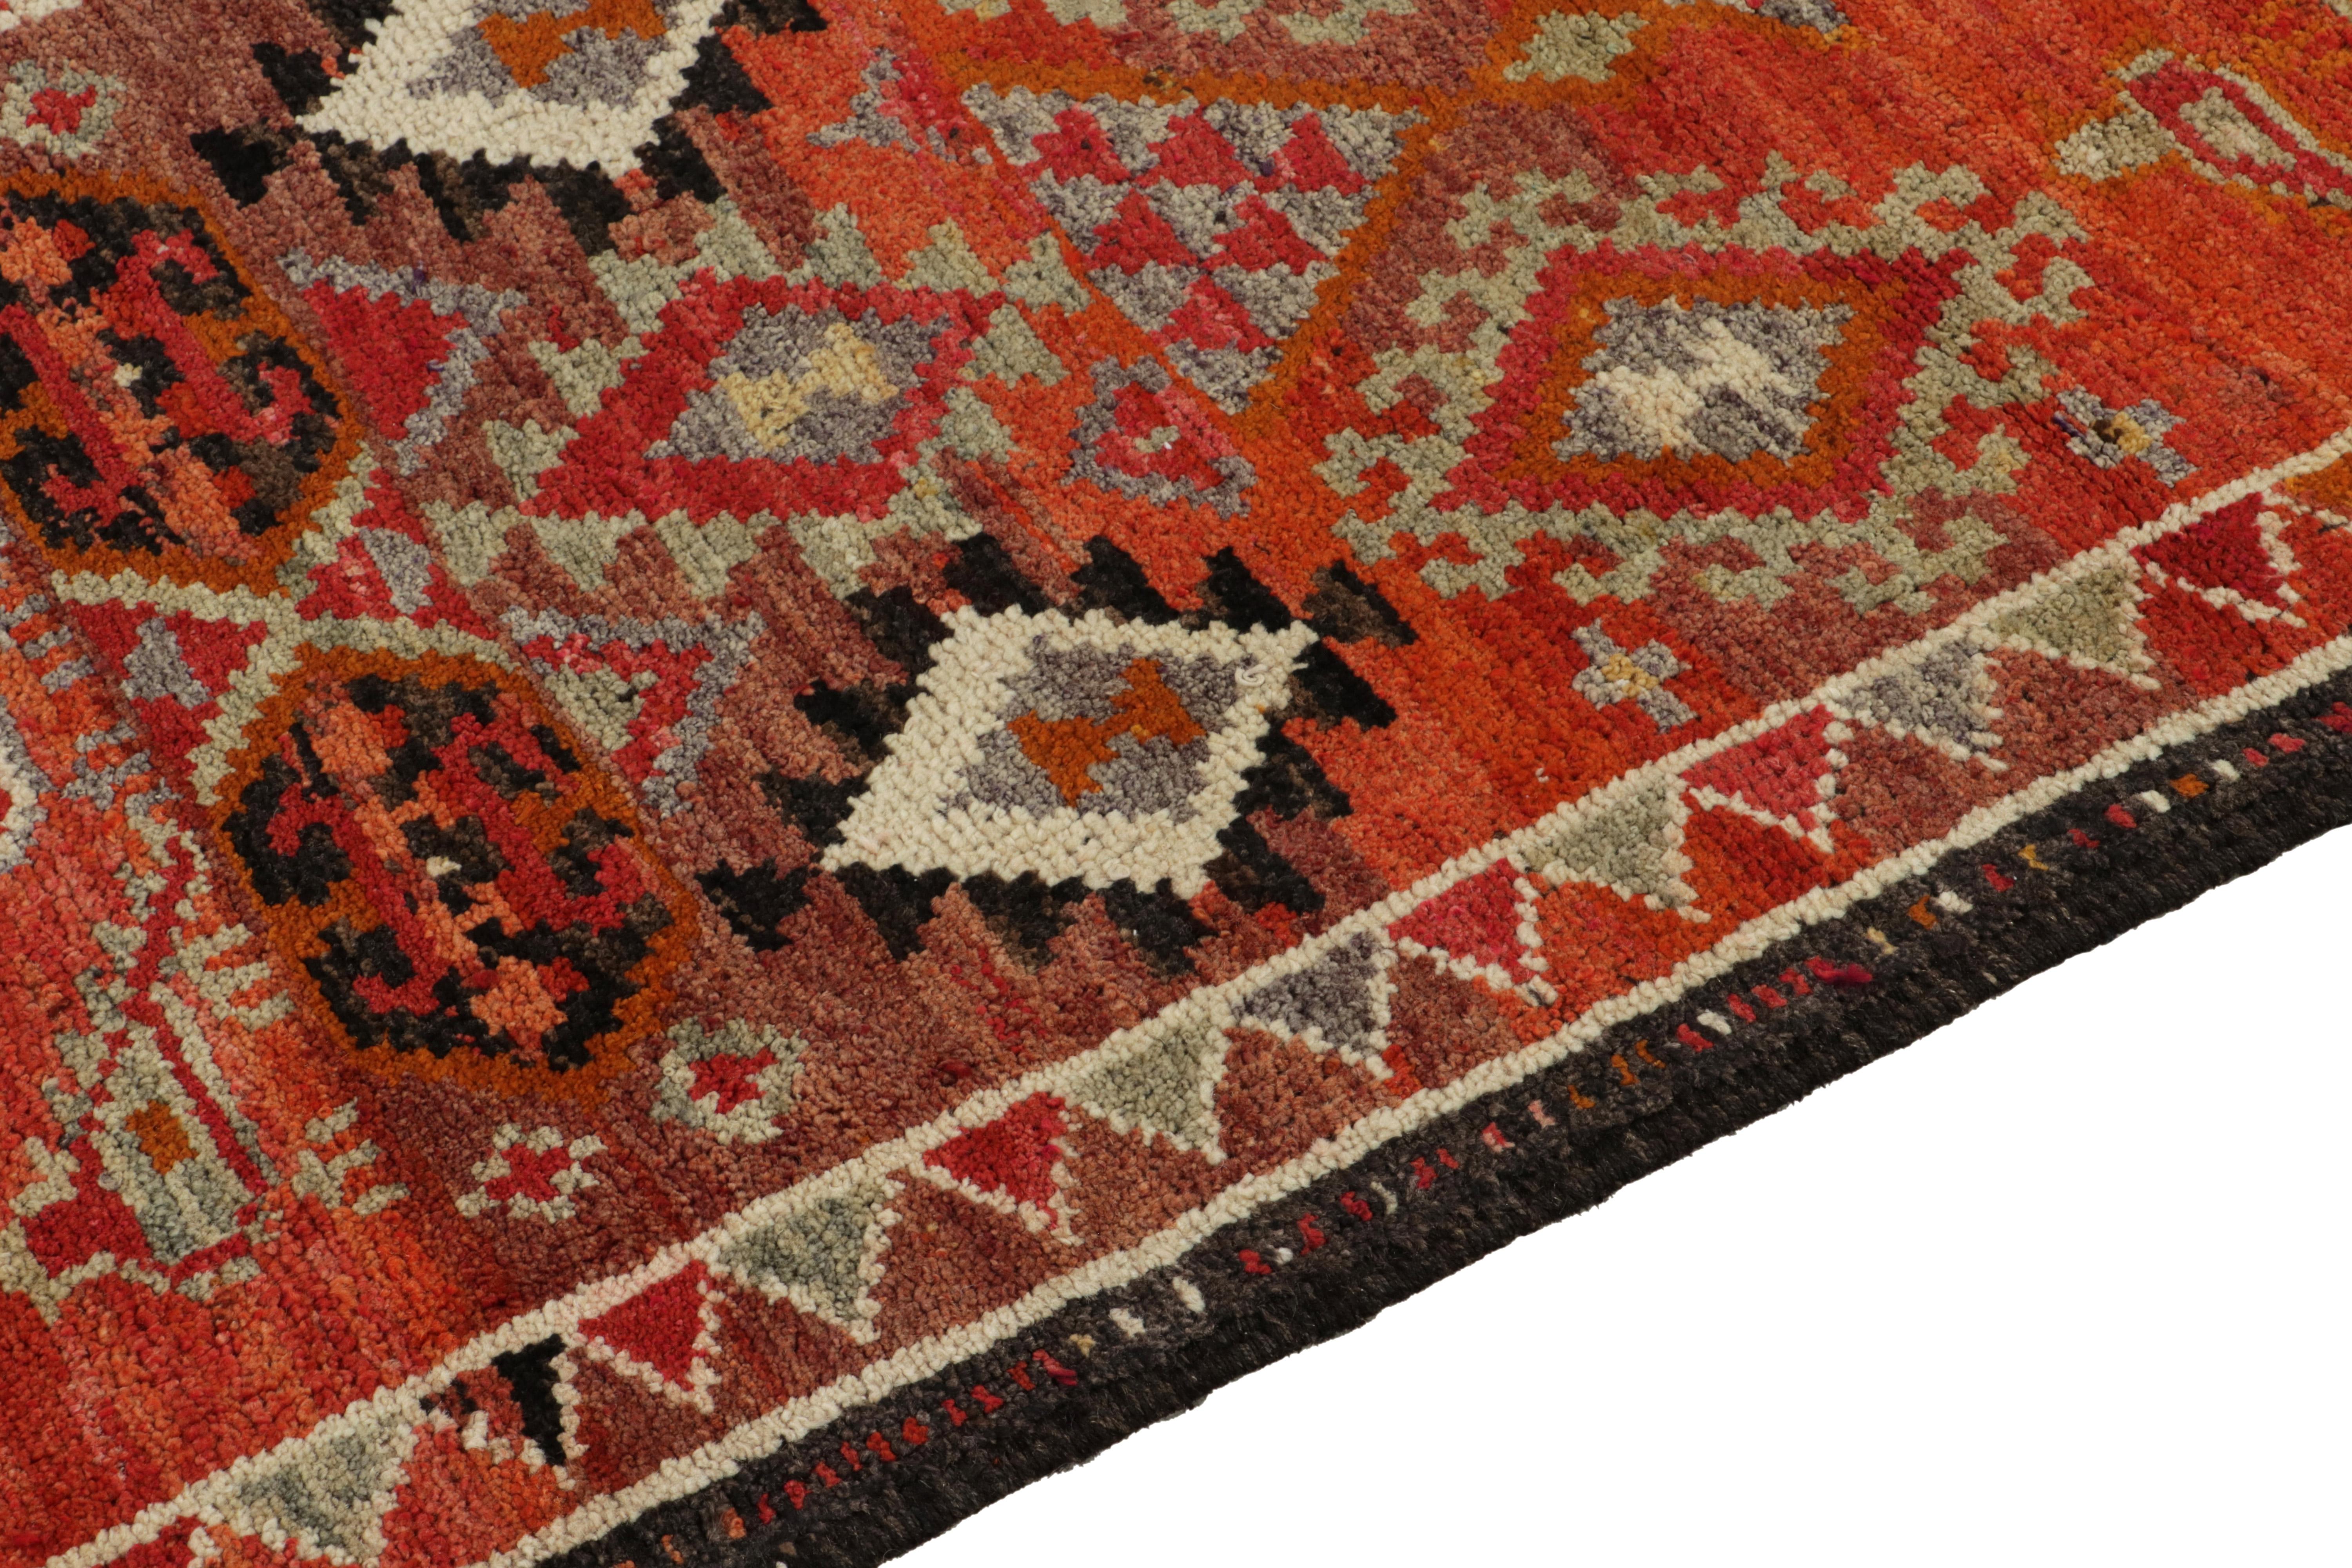 1950s Vintage Tribal Runner in Orange Red Multihued Tribal Motifs by Rug & Kilim In Good Condition For Sale In Long Island City, NY